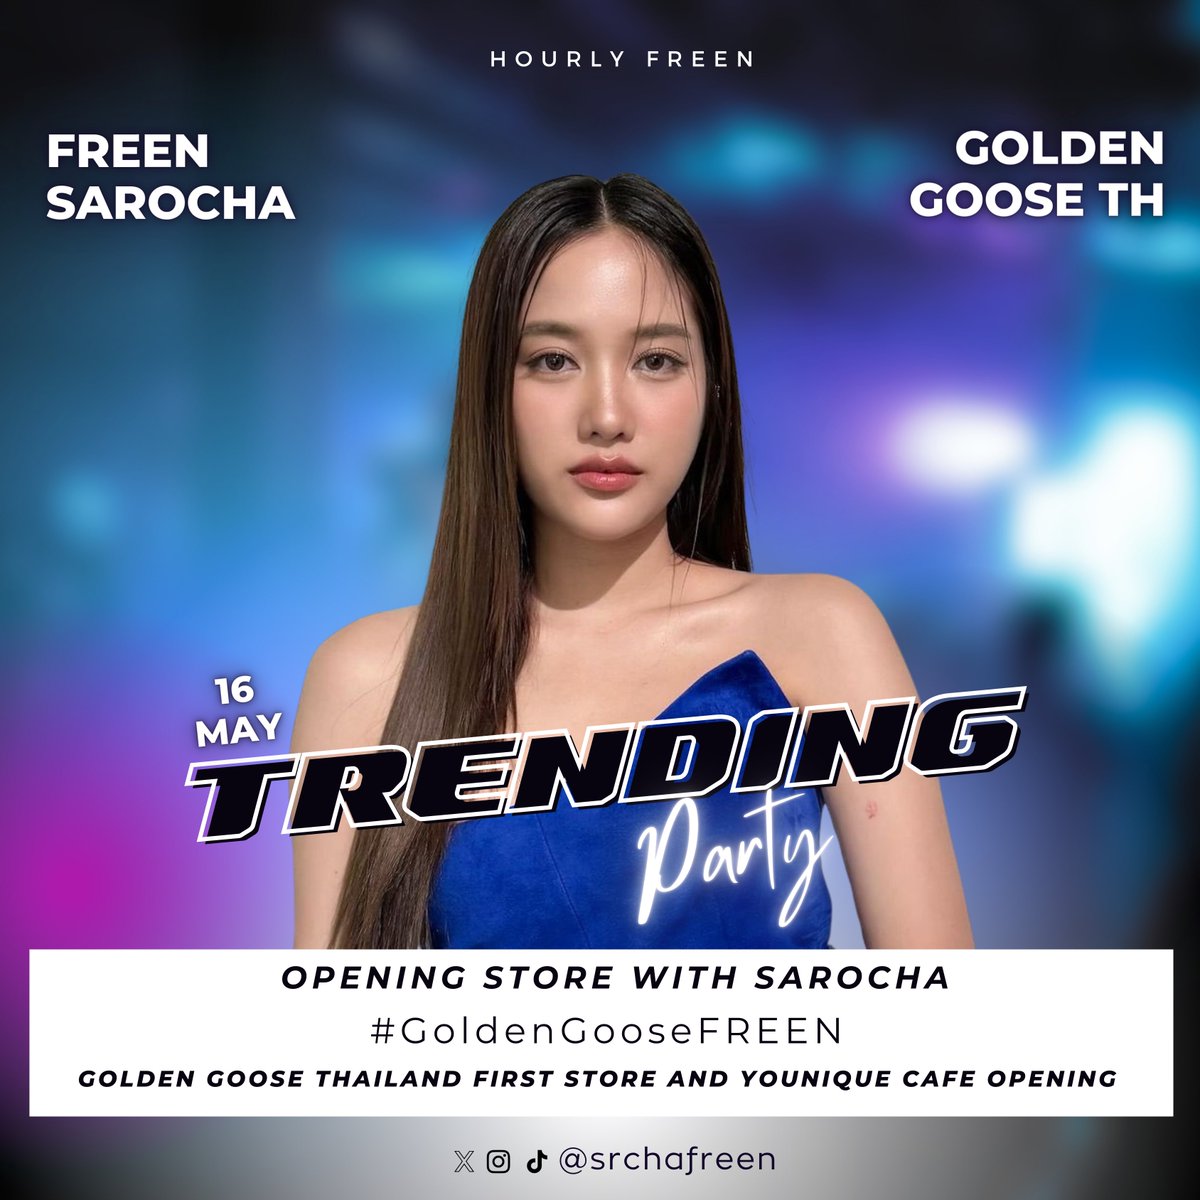 ‼️ TRENDING PARTY today for #FreenSarocha 🌷

Golden Goose Thailand First Store & Younique Cafe Opening! 

🗓️ 05.16.2024
⏰ 4PM 🇹🇭 
📍 EmQuartier M Floor 

🔤 OPENING STORE WITH SAROCHA
📉#.GoldenGooseFREEN
⌚️ Start trend at 3:30PM 🇹🇭

#srchafreen #GIRLFREEN #GoldenGoose #FREEN